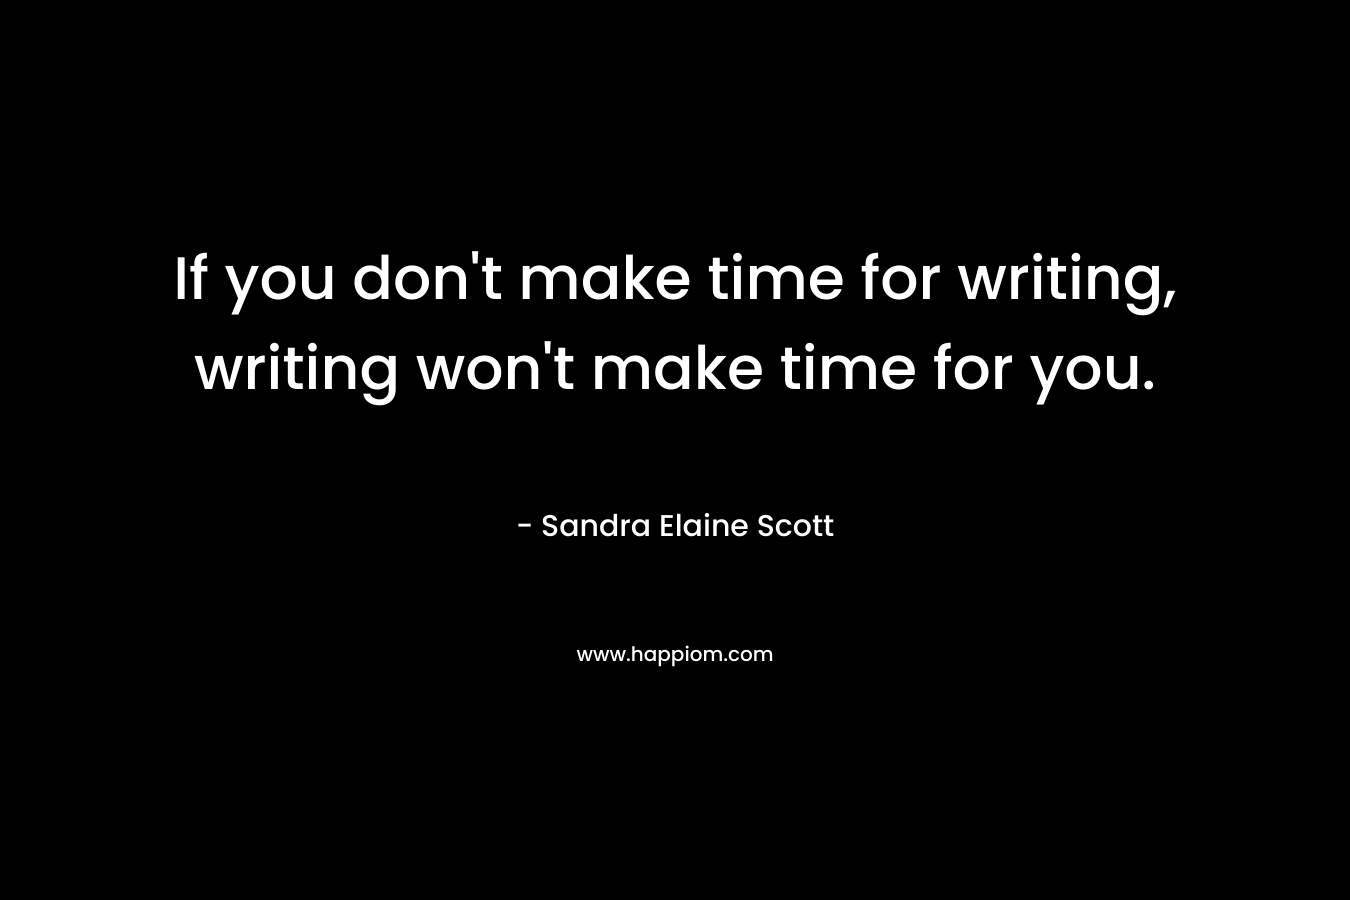 If you don't make time for writing, writing won't make time for you.